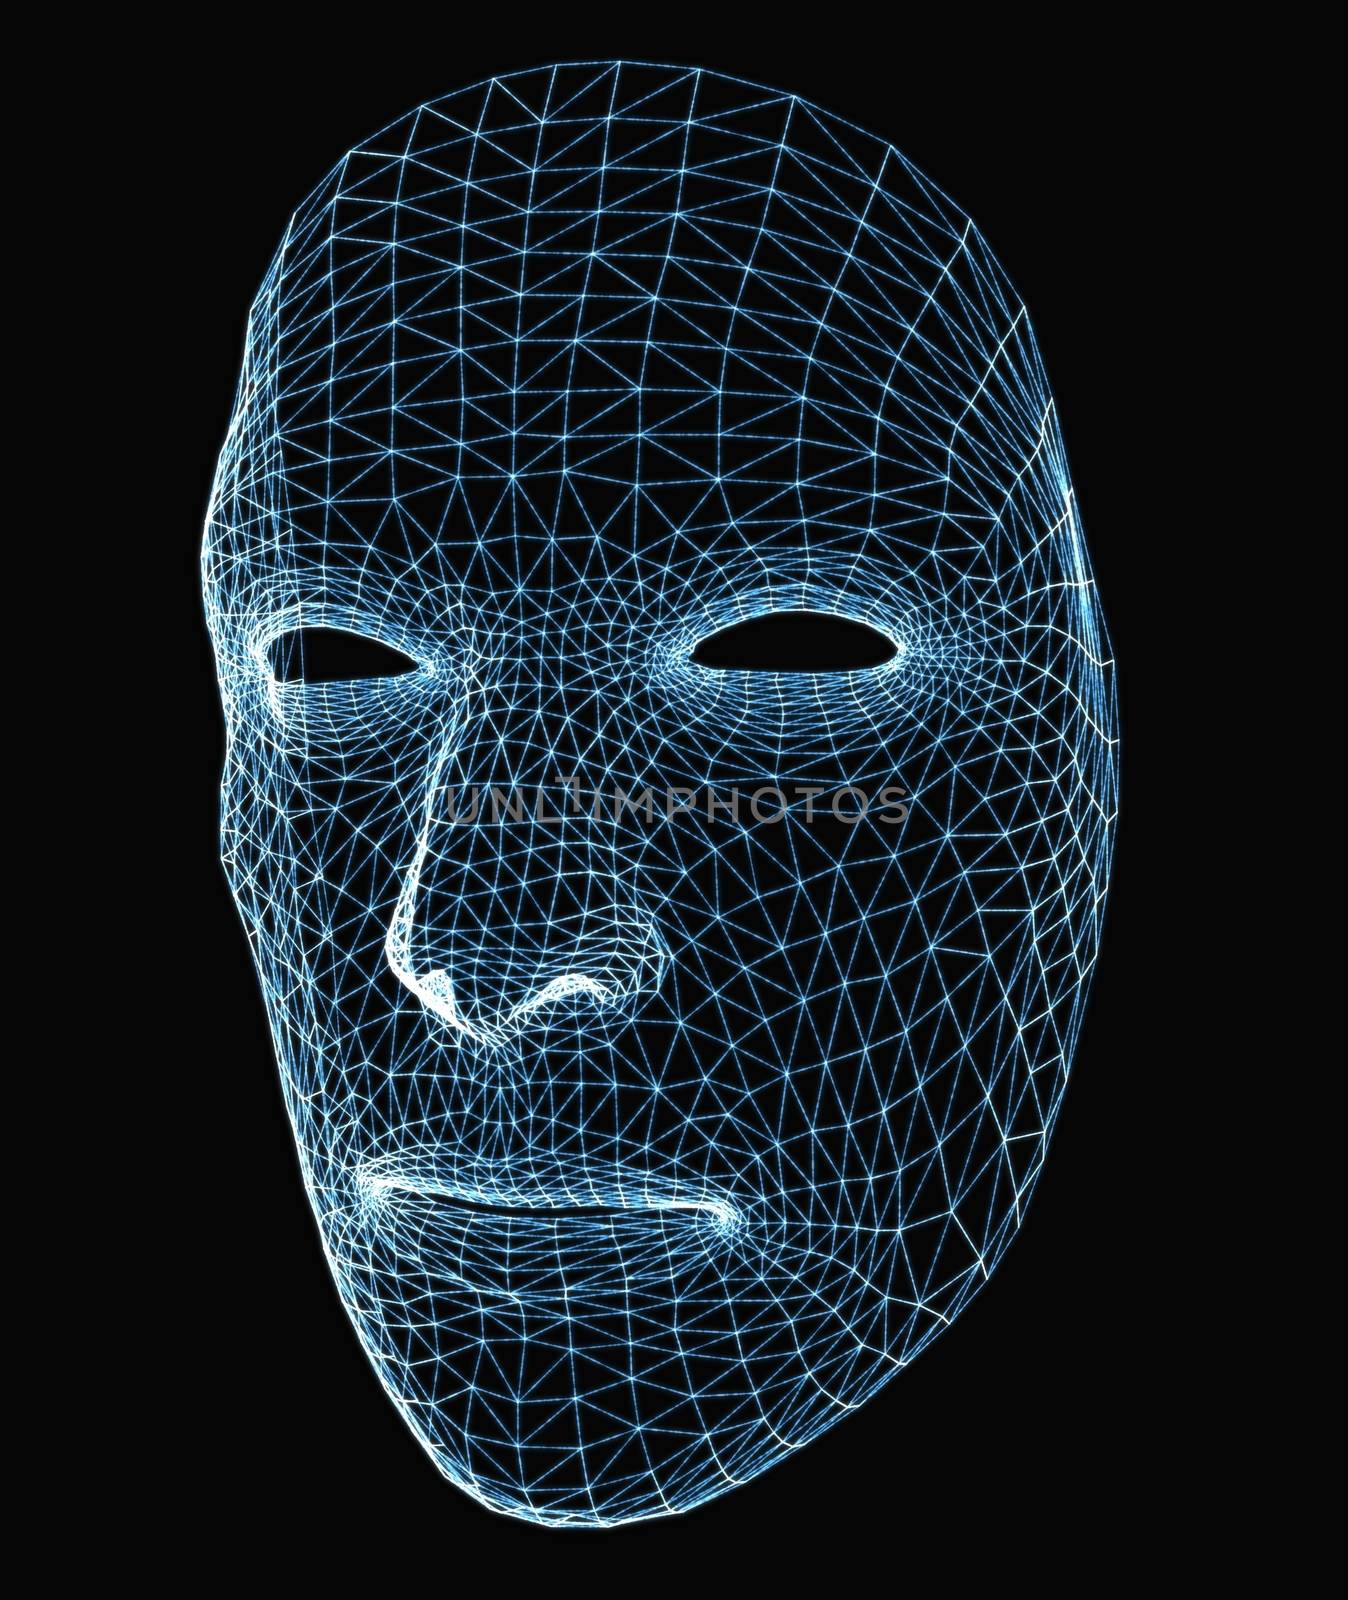 Human face consisting of luminous lines and dots. 3d illustration on a black background